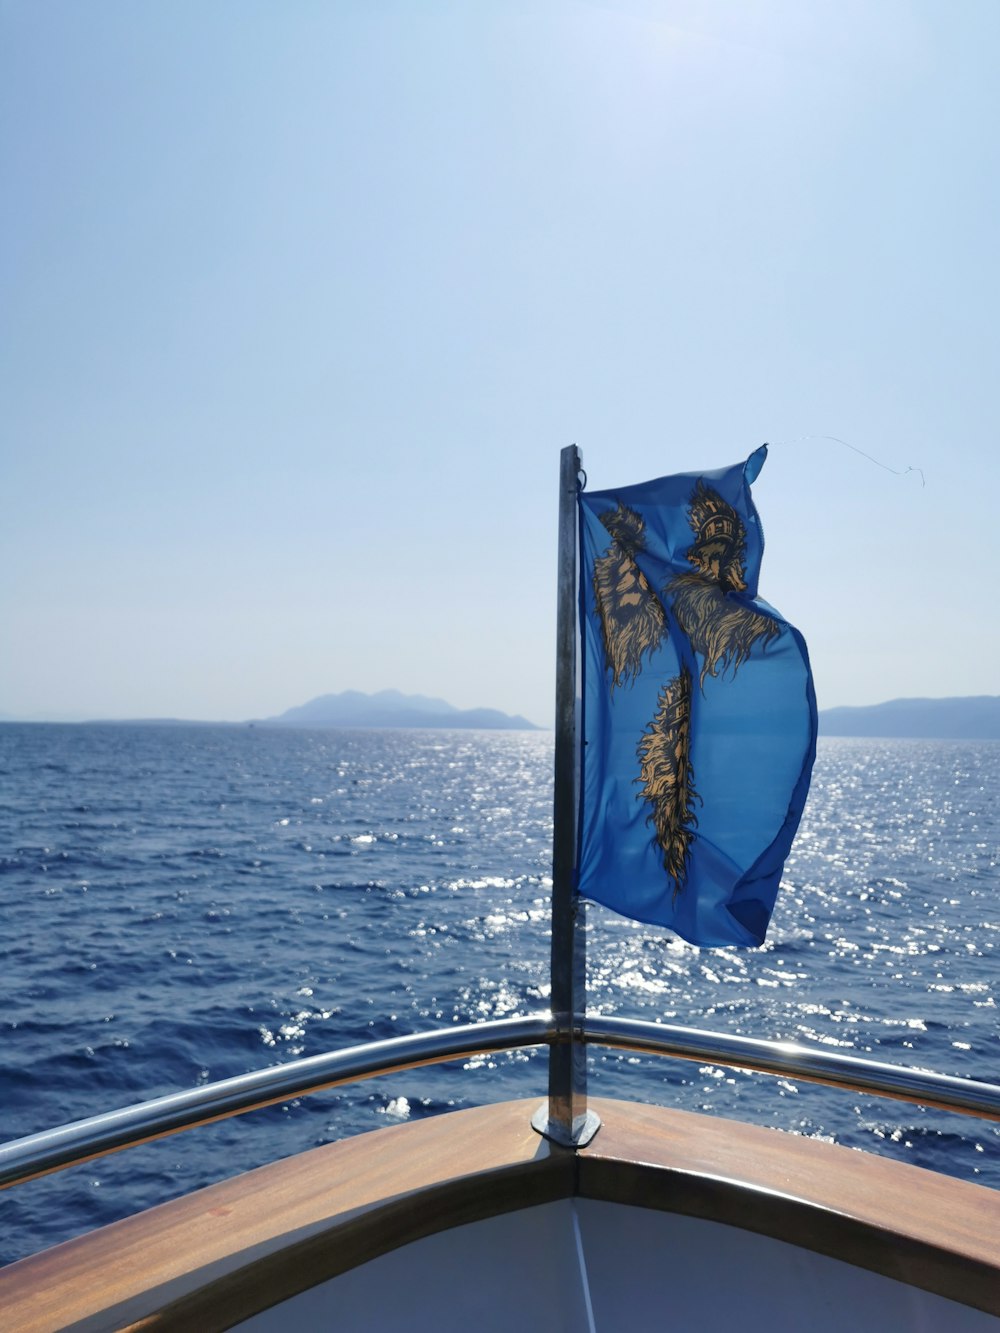 a blue flag on a boat in the ocean